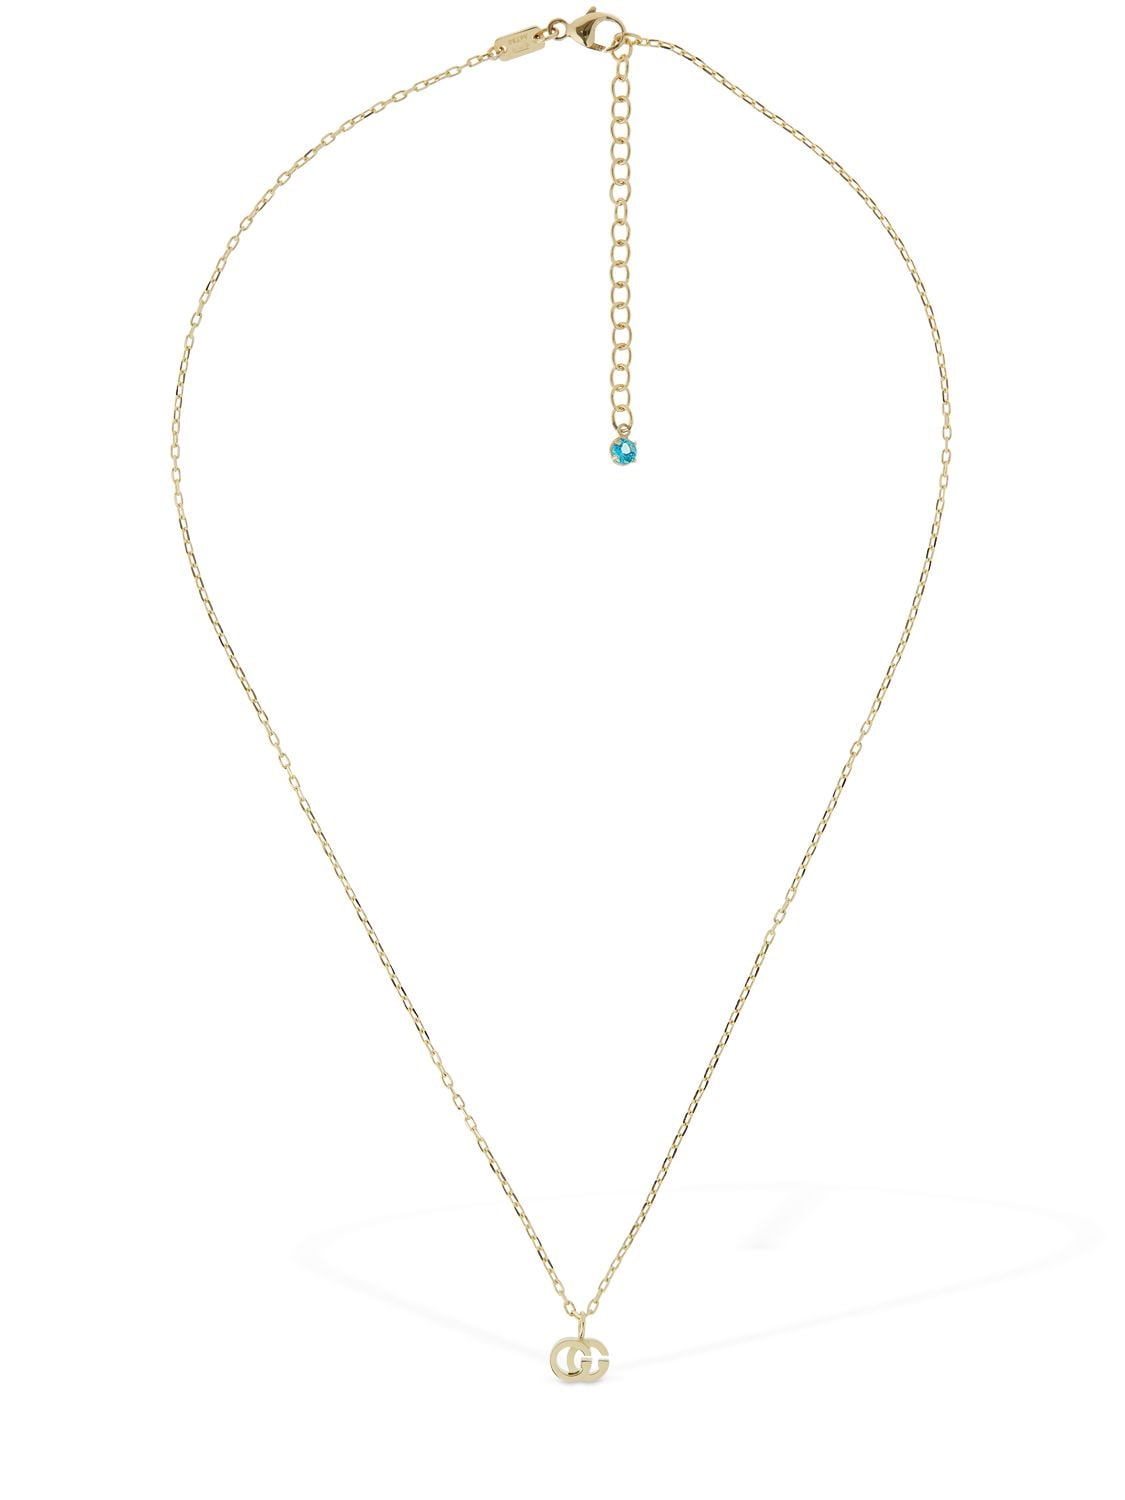 GUCCI 18KT GOLD & TOPAZ GG RUNNING NECKLACE,73IY1W007-ODA3NG2